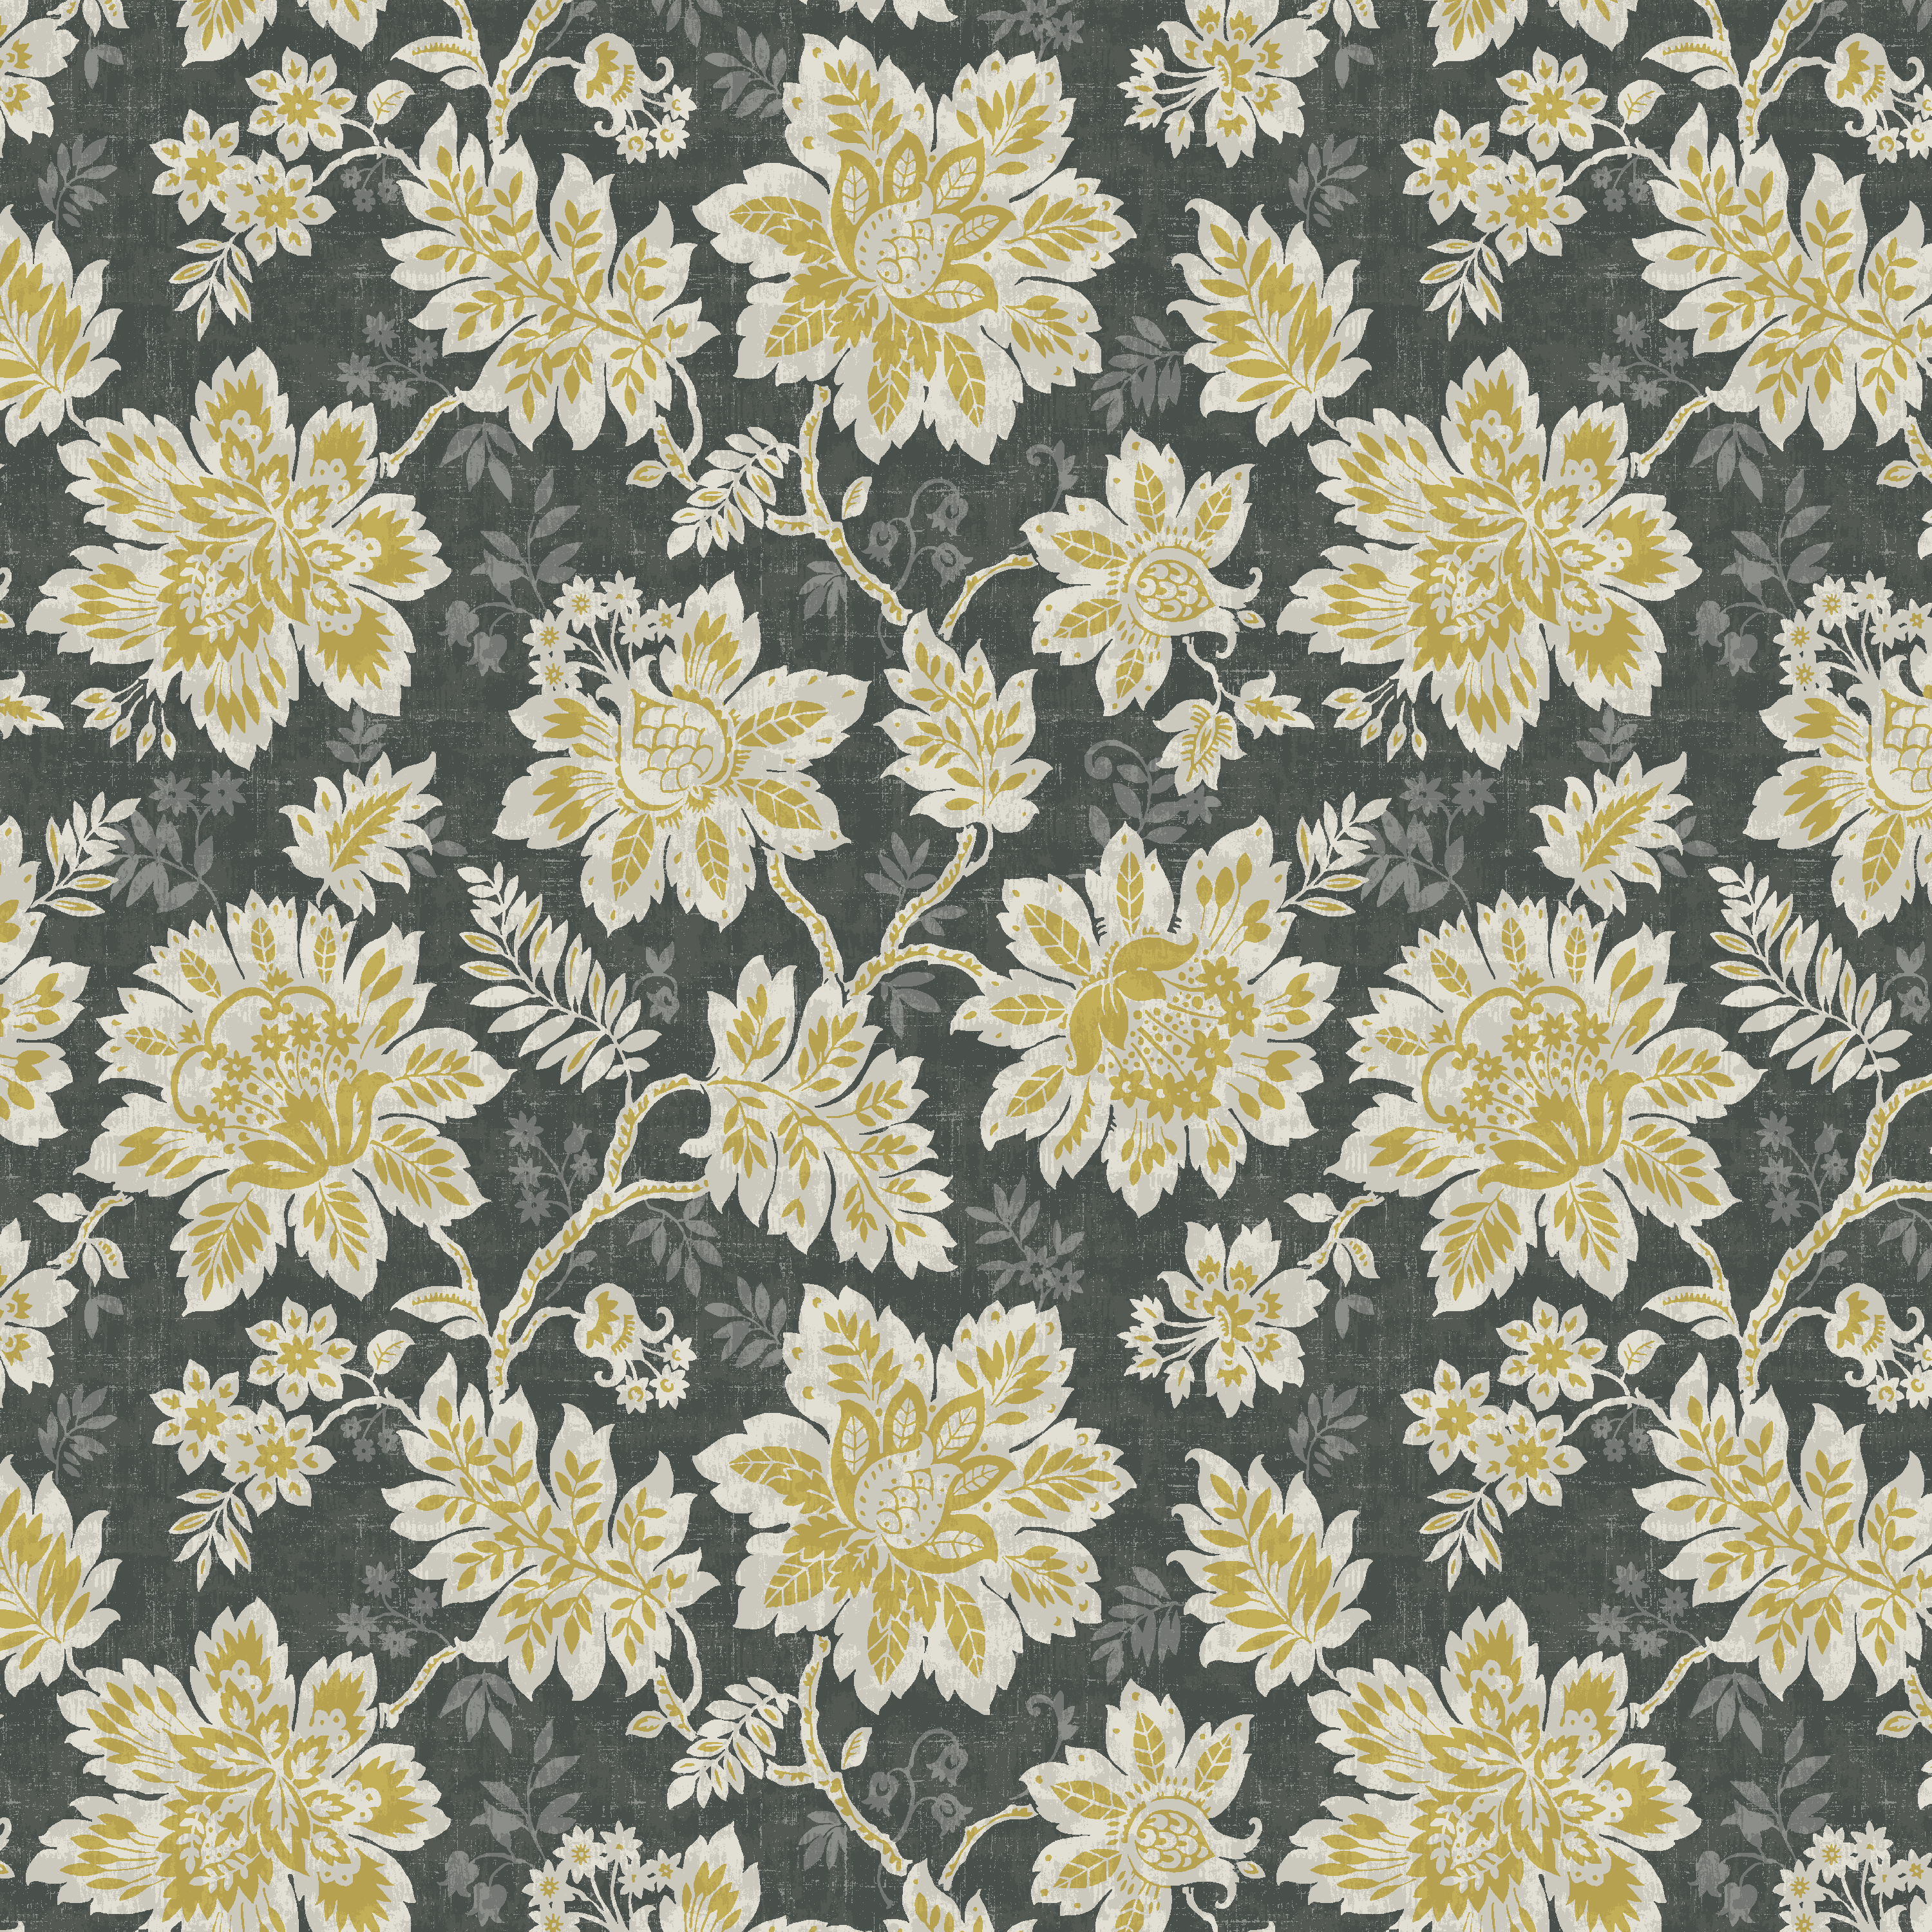 Waverly Inspirations 100% Cotton Duck 45" Width Petal Print Black Sunshine Color Sewing Fabric by the Yard